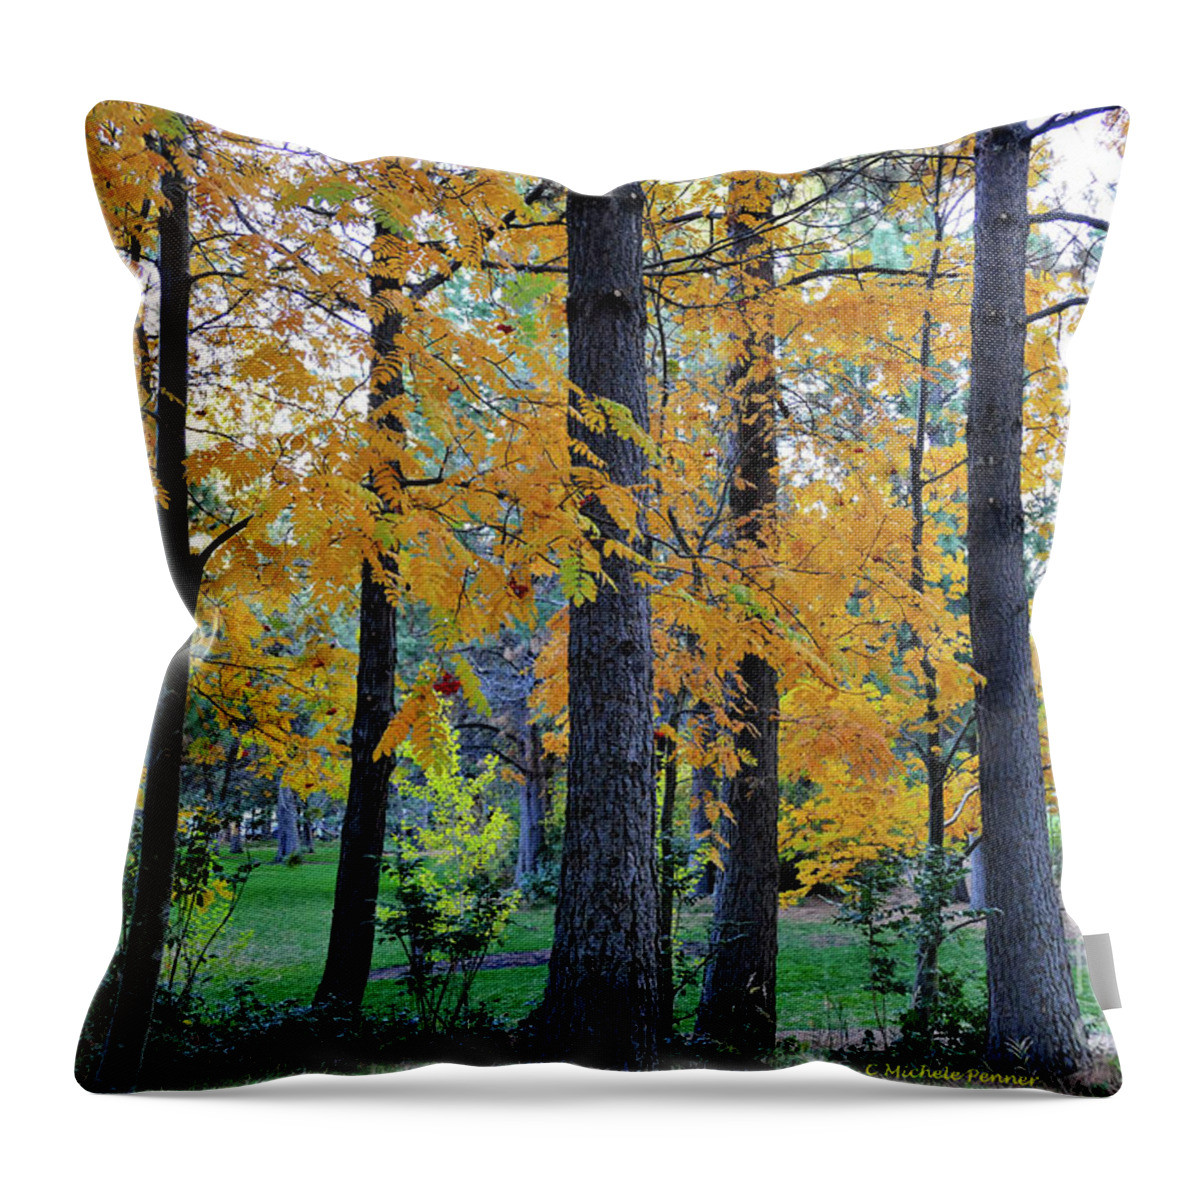 Pine Throw Pillow featuring the photograph Mountain Ash Under Pine by Michele Penner